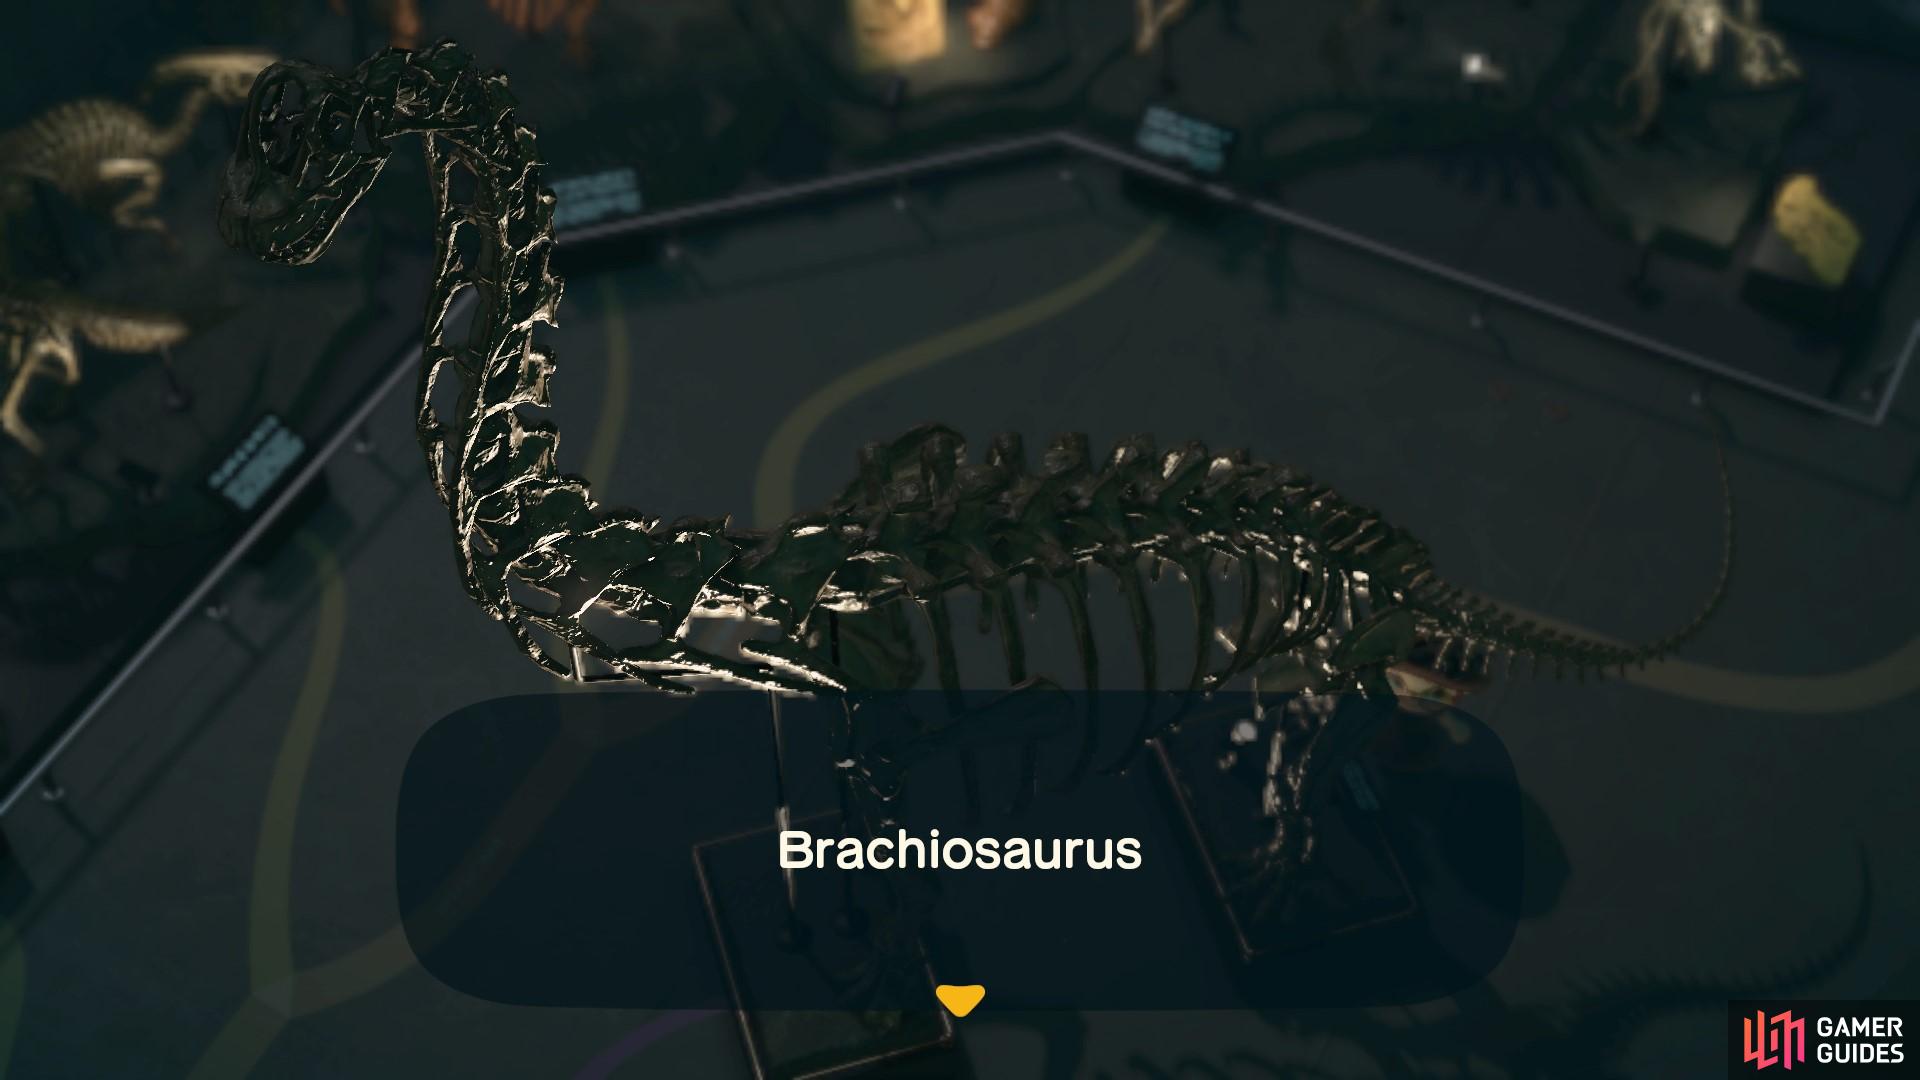 The Brachiosaurus is made up of several parts.